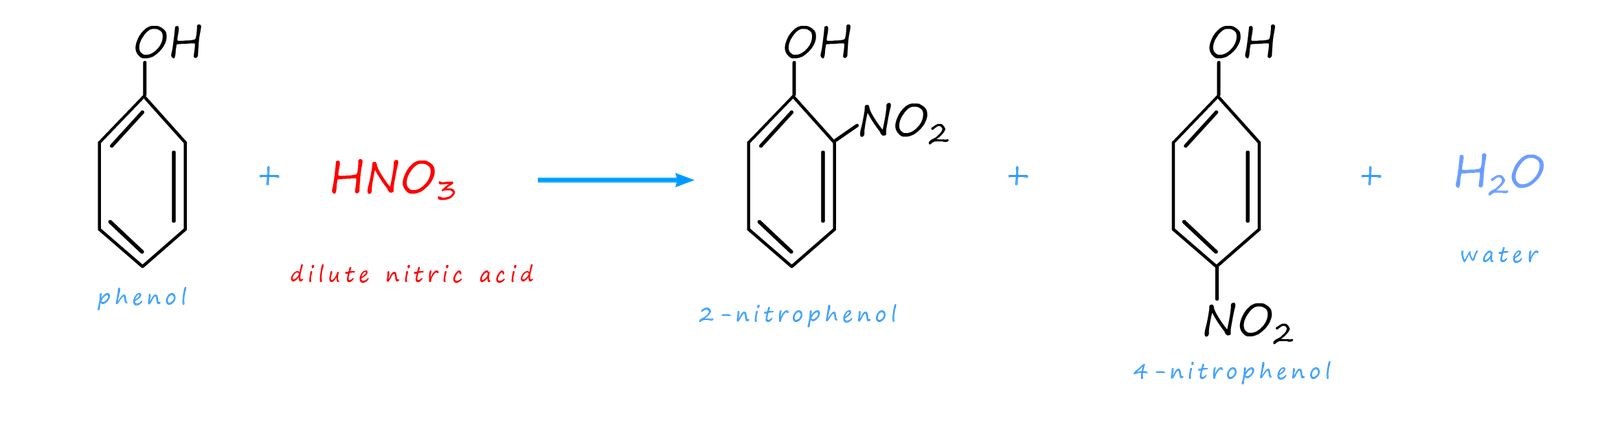 equations for the nitration of phenol